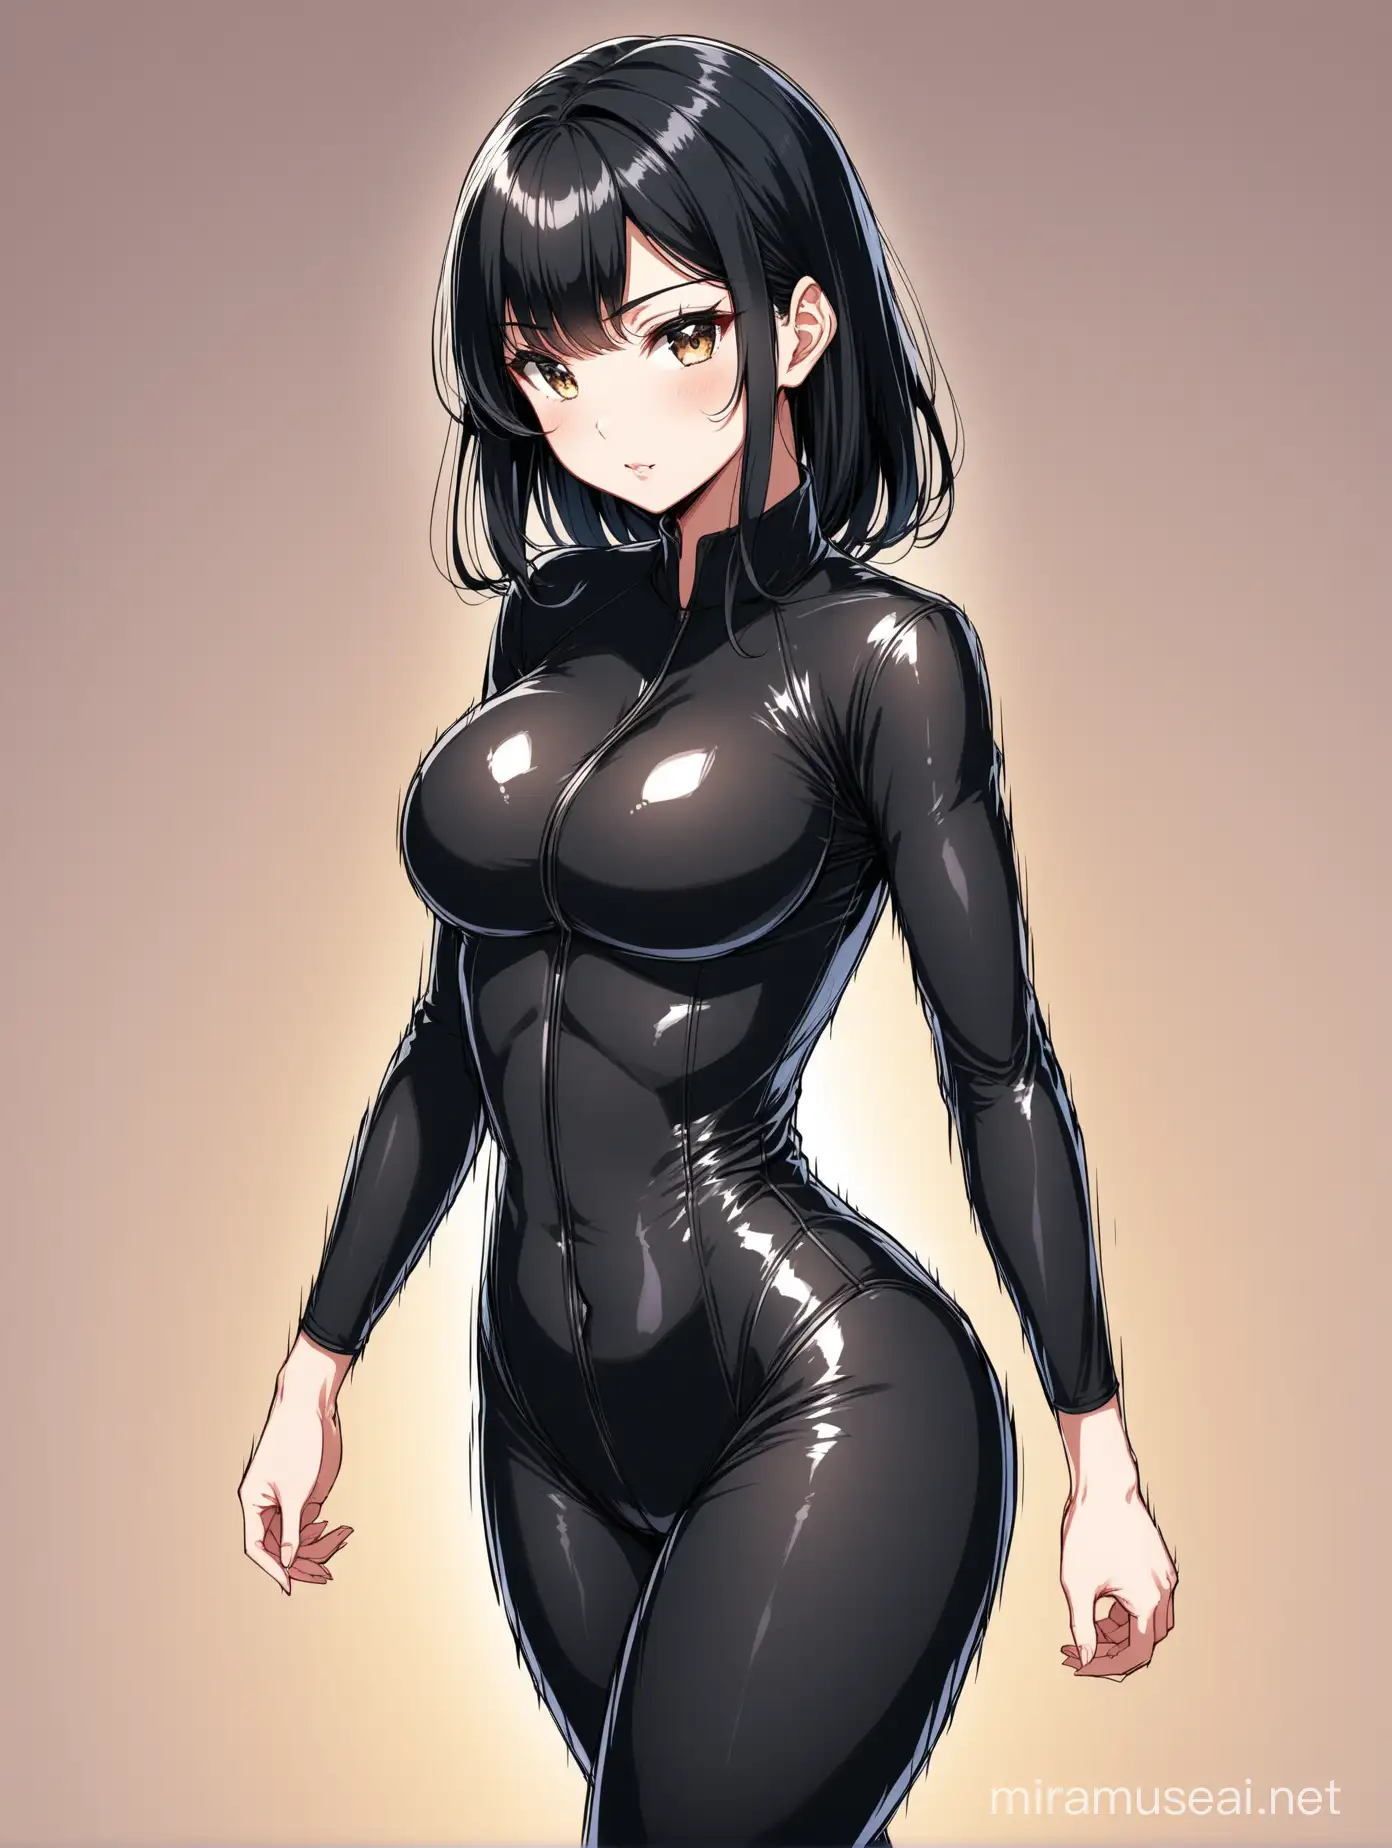 AnimeStyle Woman in Sleek Black Suit with Curves